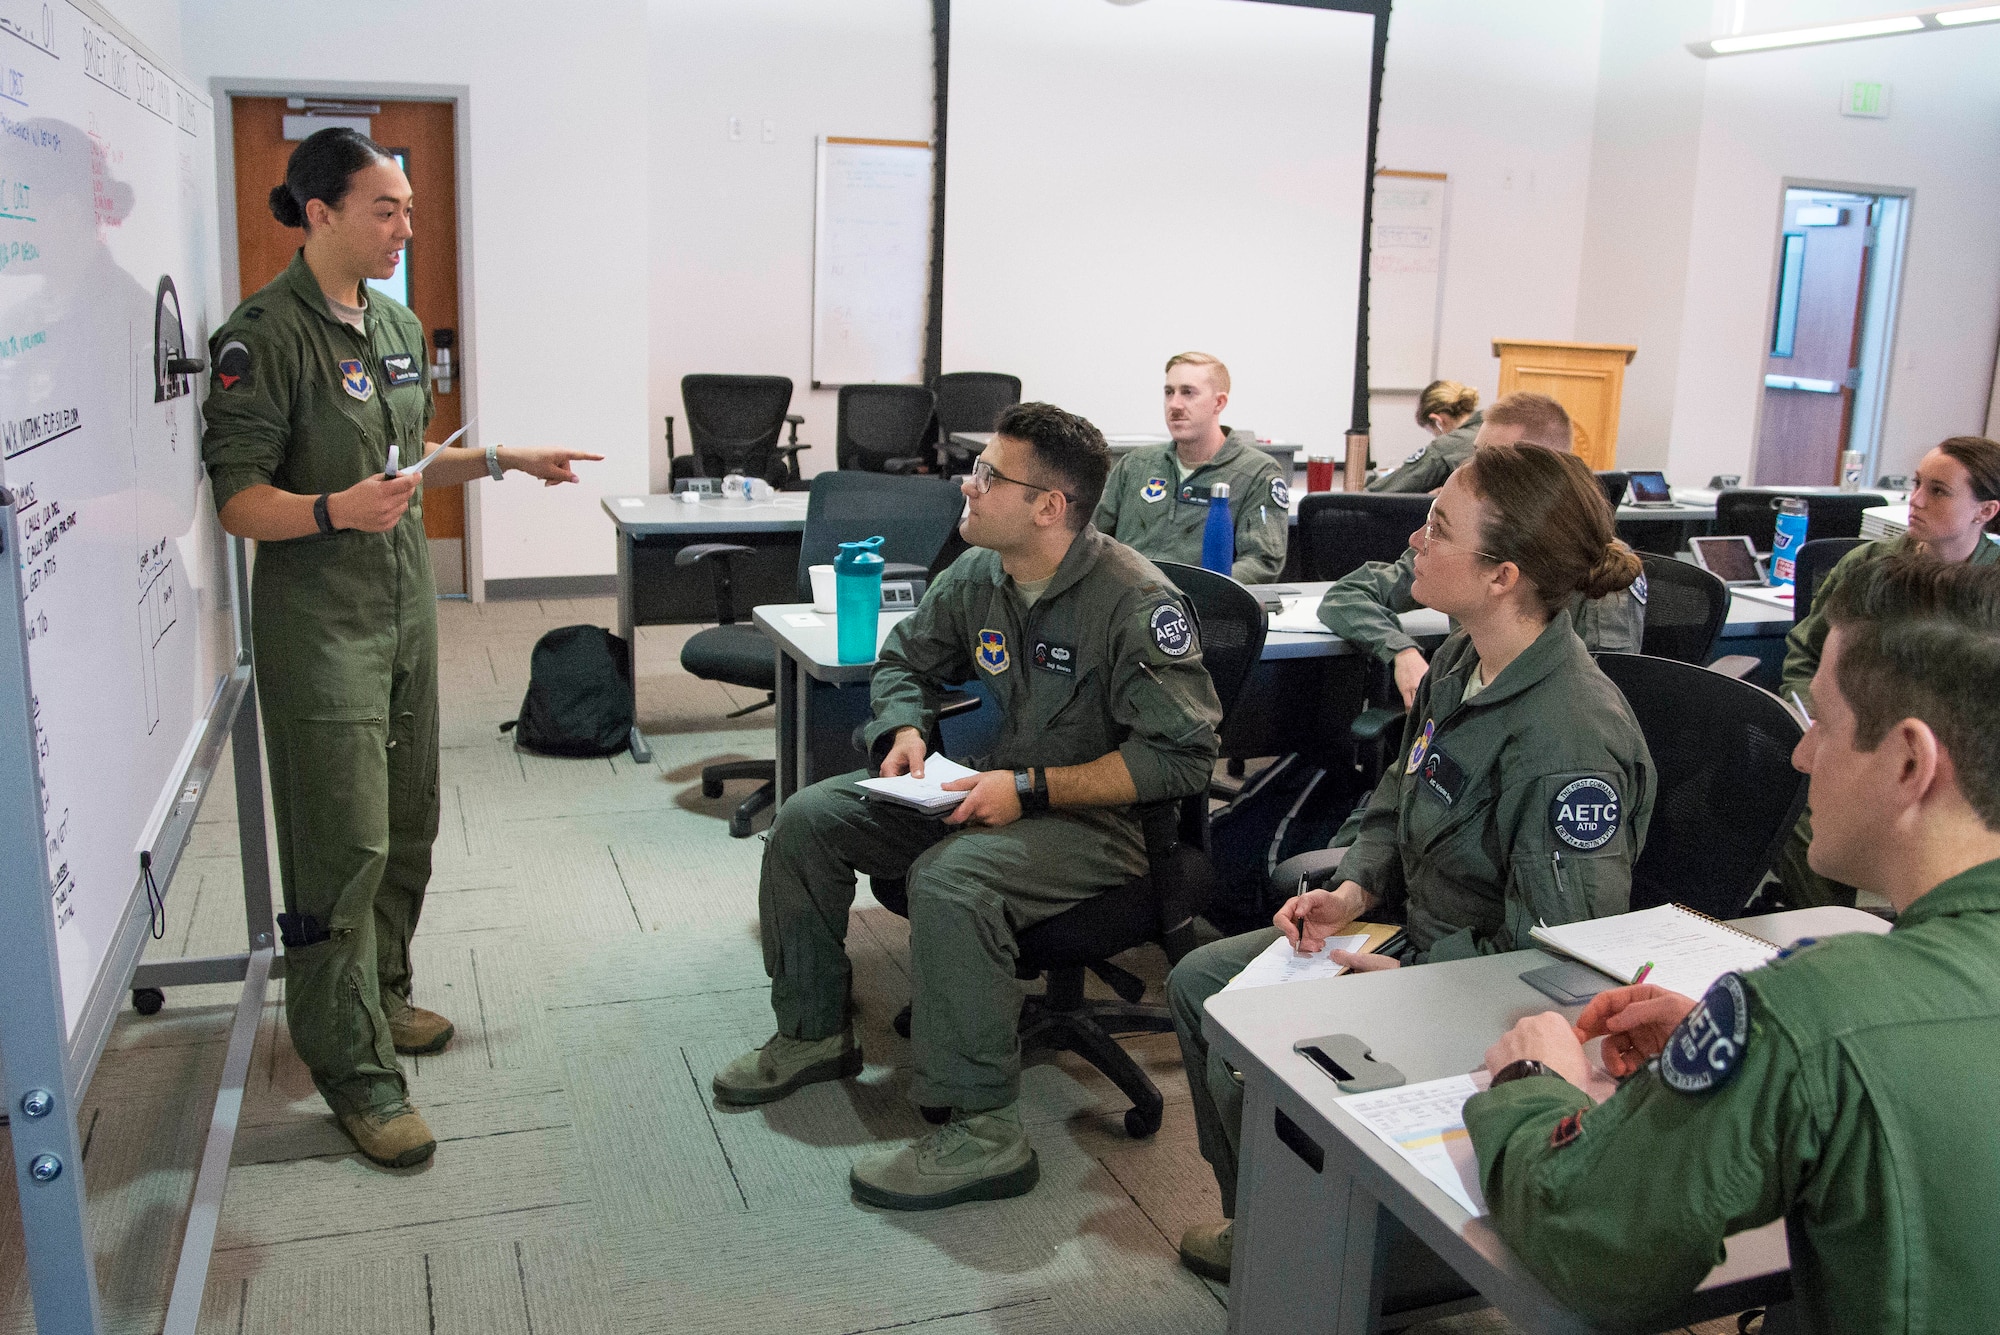 Capt. Christine Durham (left), Pilot Training Next instructor pilot, gives a briefing to her students prior to a training mission at the Armed Forces Reserve Center in Austin, Texas, Feb. 5, 2019. The current PTN class is comprised of 26 students, including 16 active duty officer students (six of whom are participating in a remotely-piloted aircraft only track), two Air National Guard officers, two U.S. Navy officers, one Royal Air Force officer, and five enlisted Airmen. (U.S. Air Force photo by Sean M. Worrell)